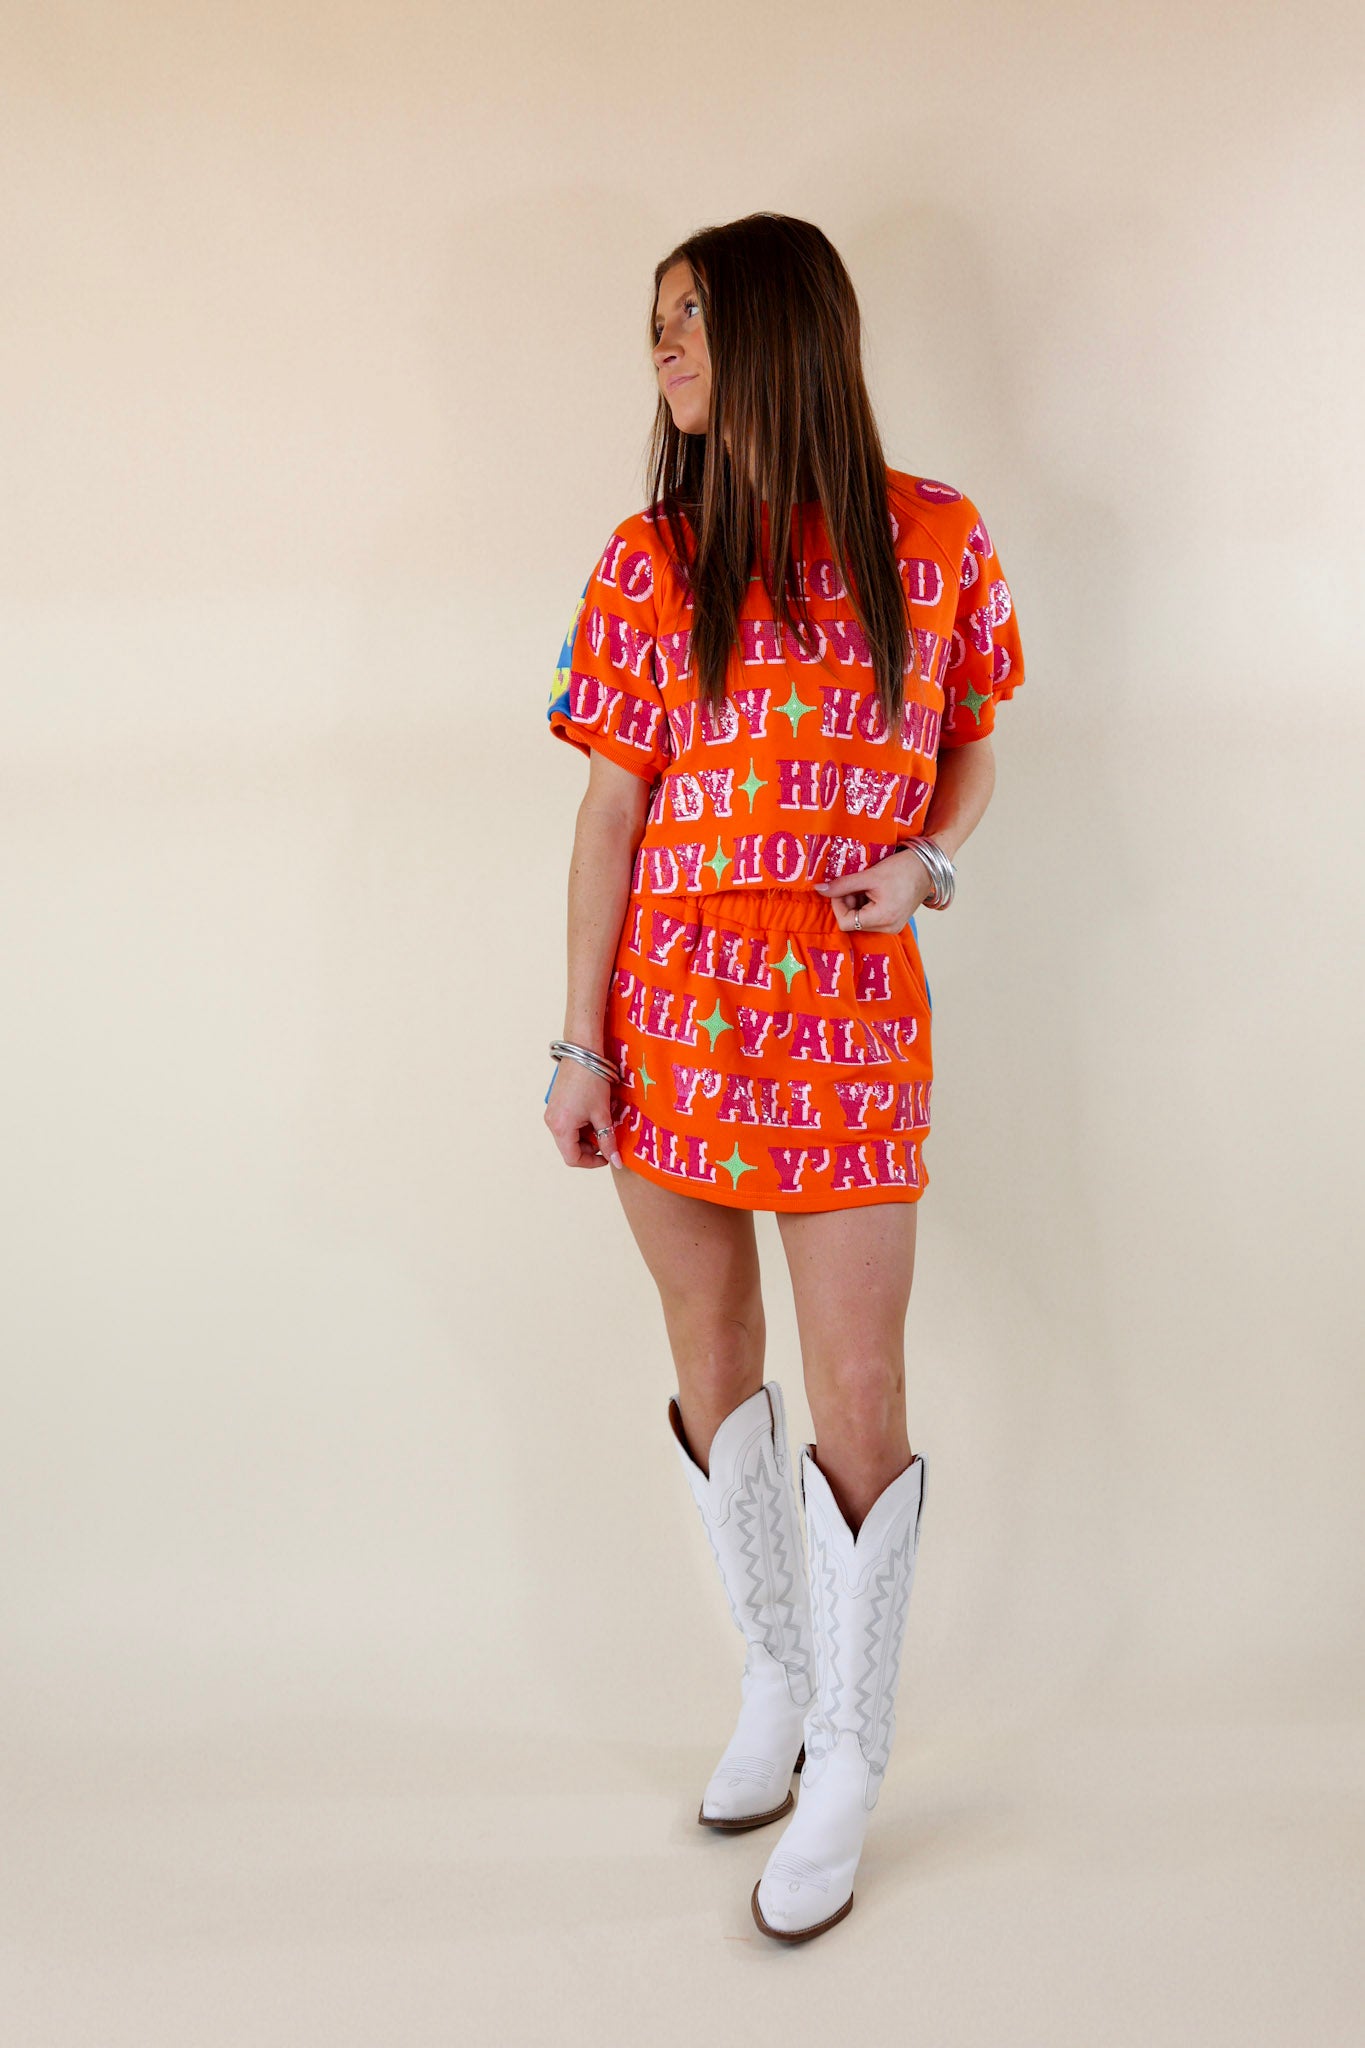 Queen Of Sparkles | Howdy Y'all Graphic Colorblock Short Sleeve Top in Orange & Blue - Giddy Up Glamour Boutique